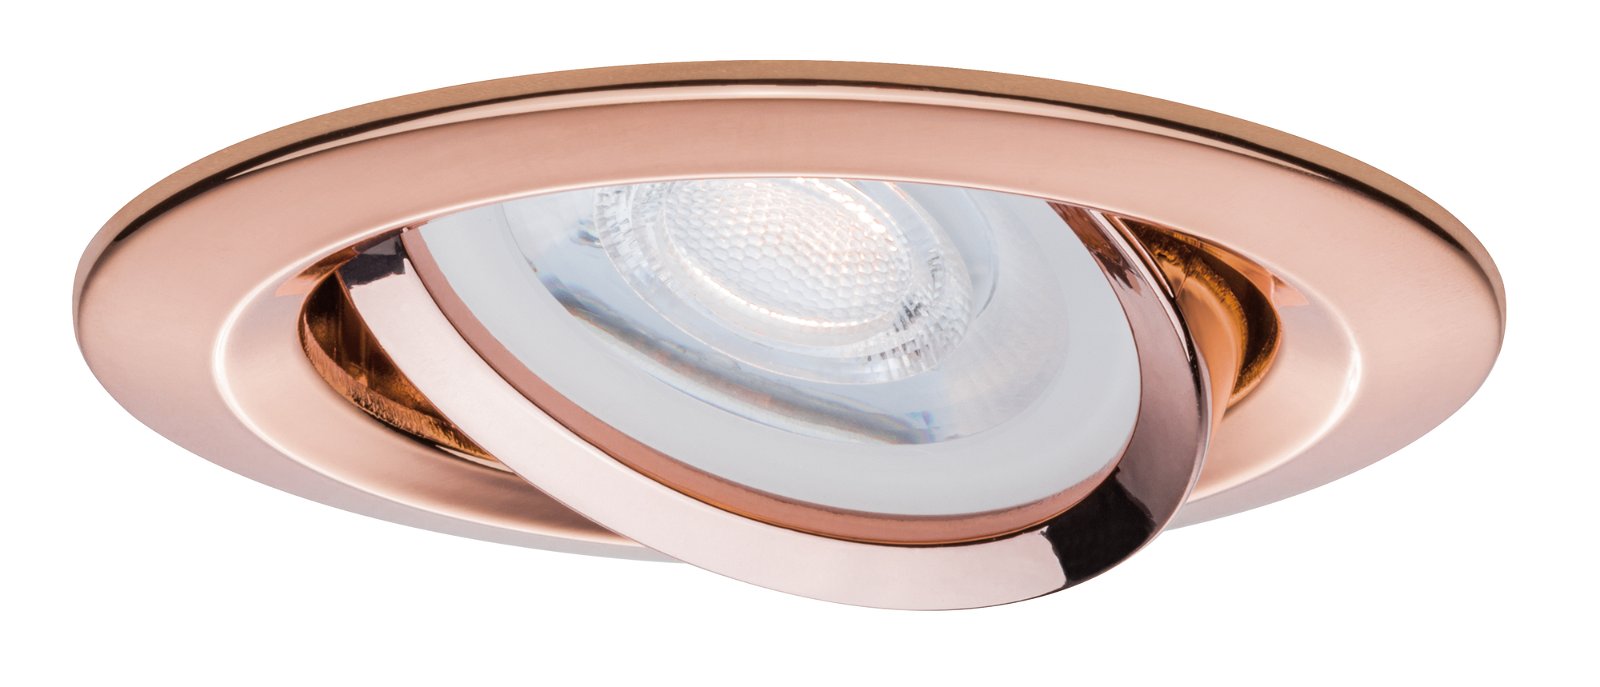 Recessed luminaire LED Nova IP23 round 7 W GU10 rosé gold 3-piece set, dimmable and swivelling